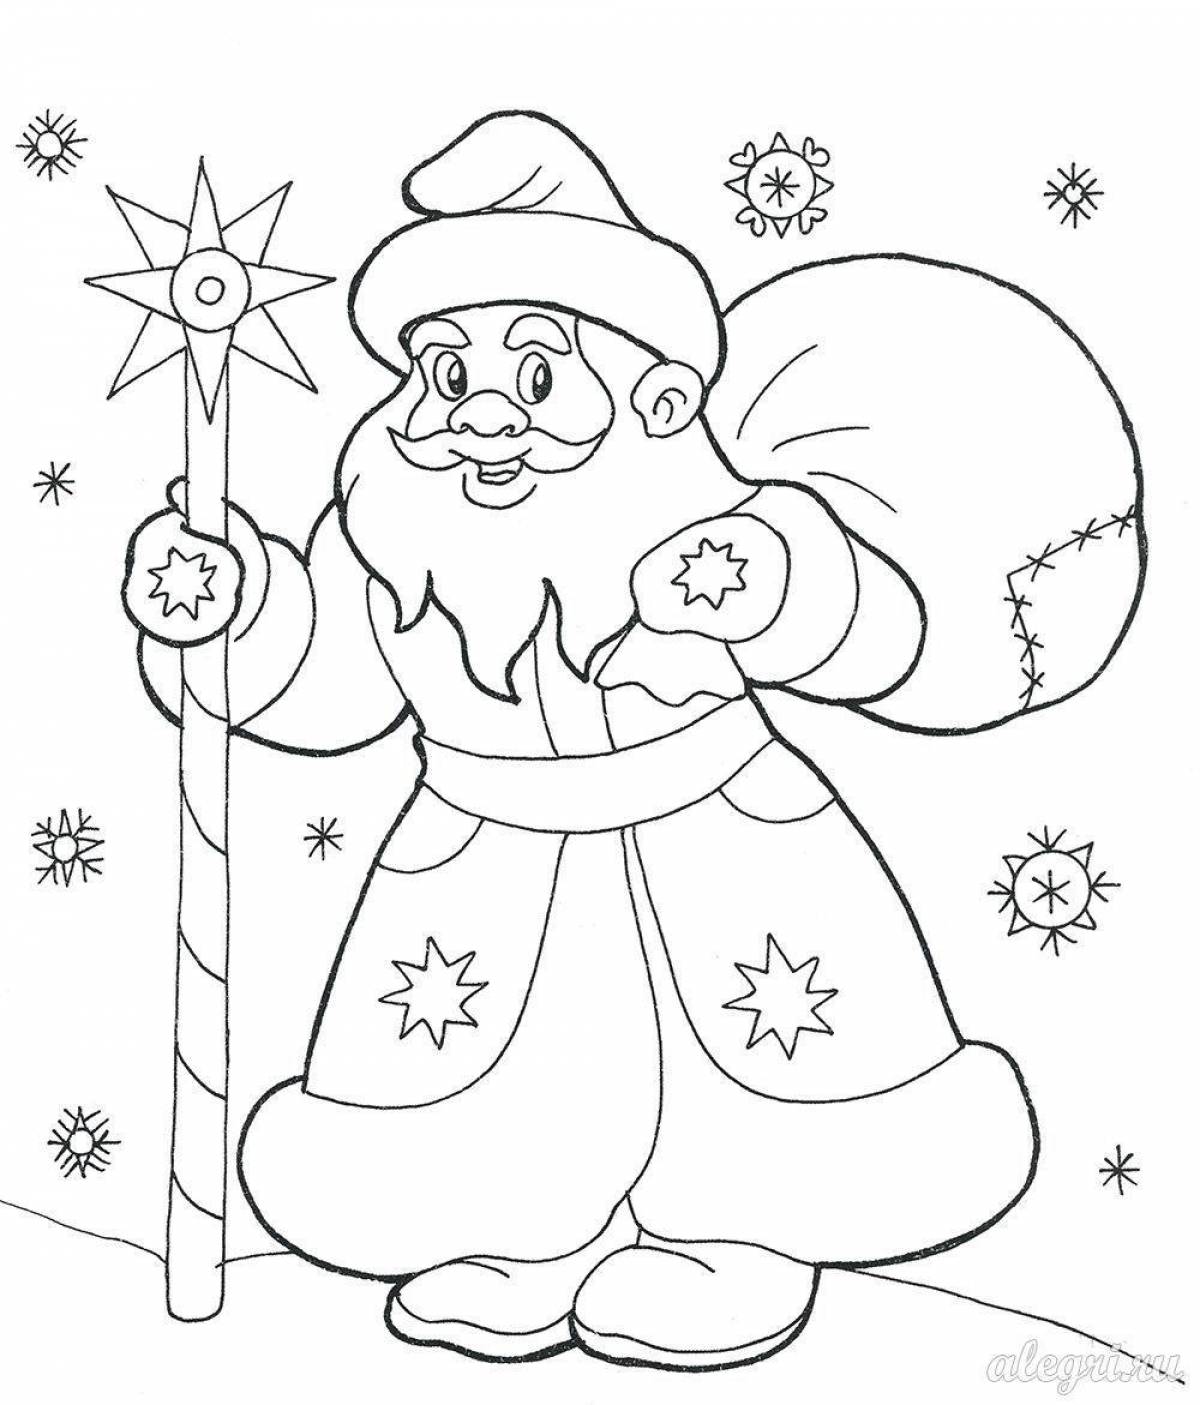 Great Christmas coloring book